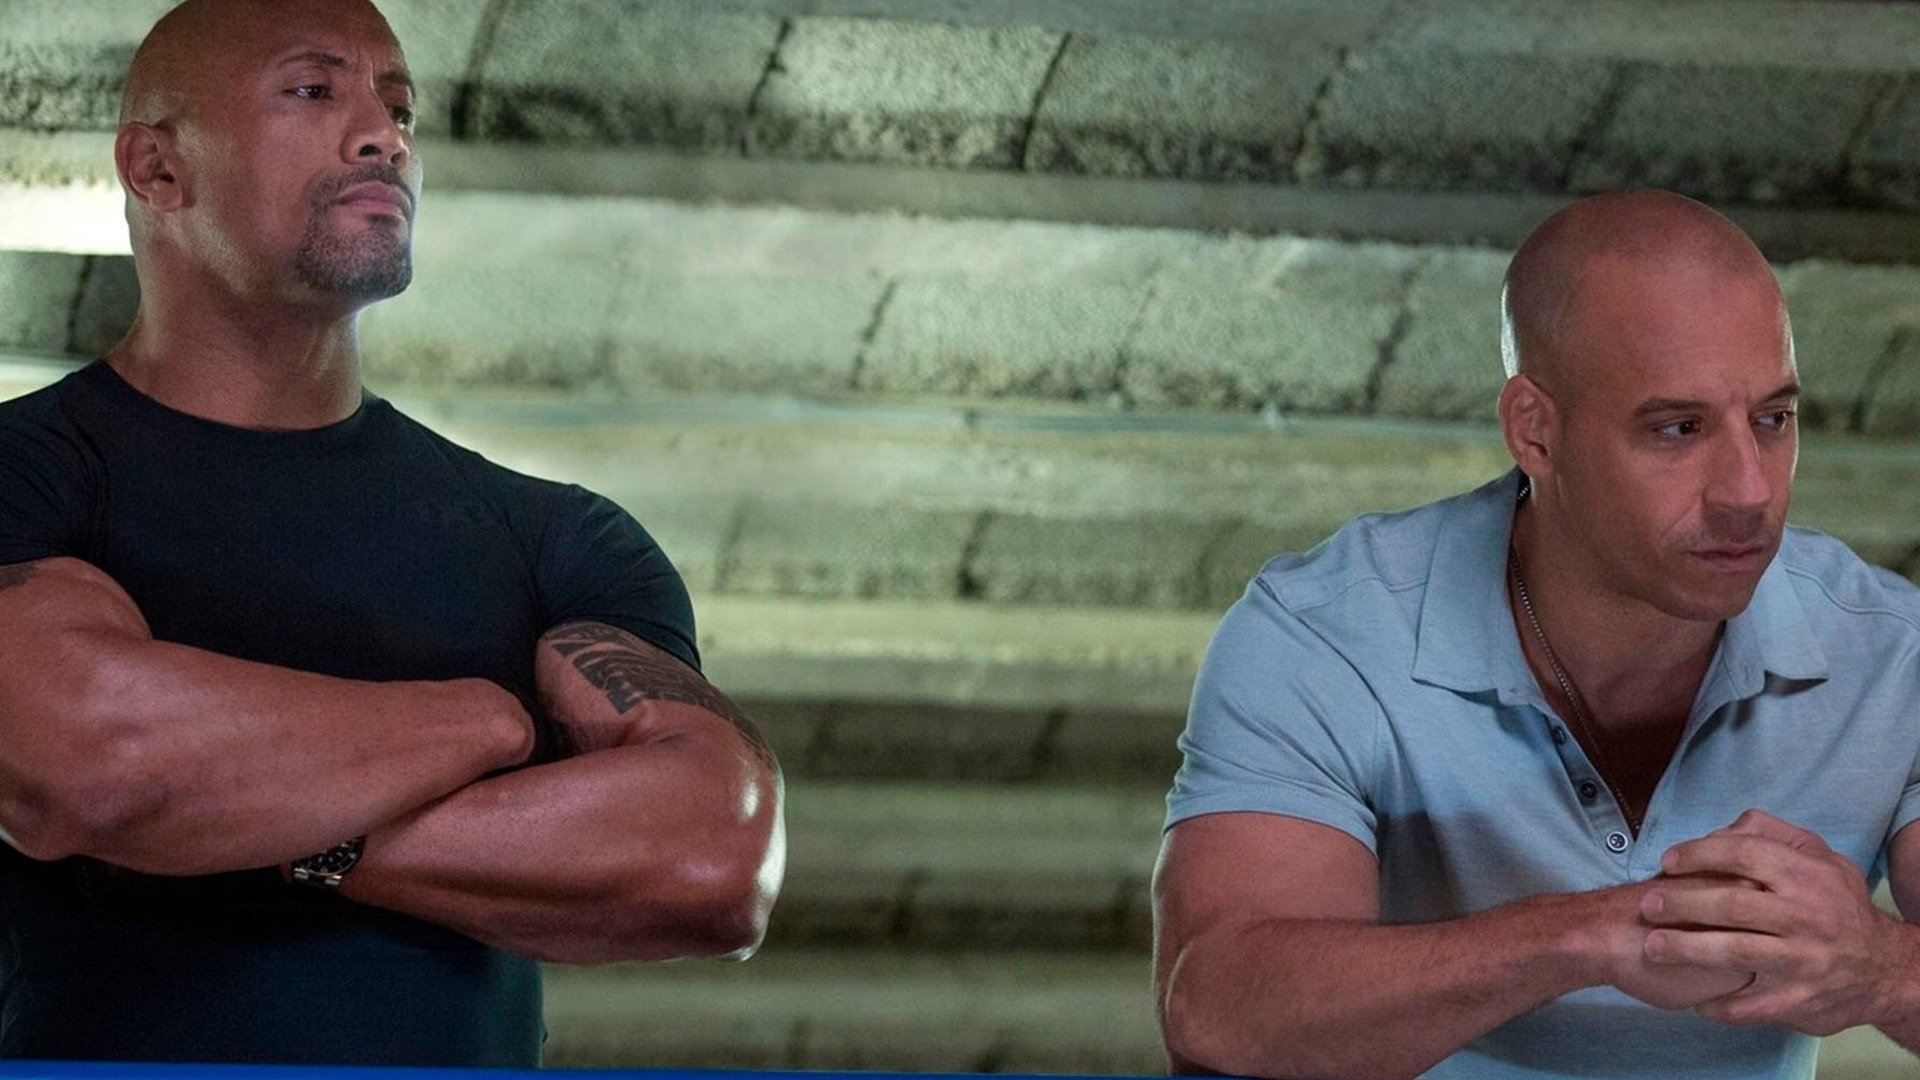 Dwayne Johnson says he's returning to 'Fast & Furious' franchise